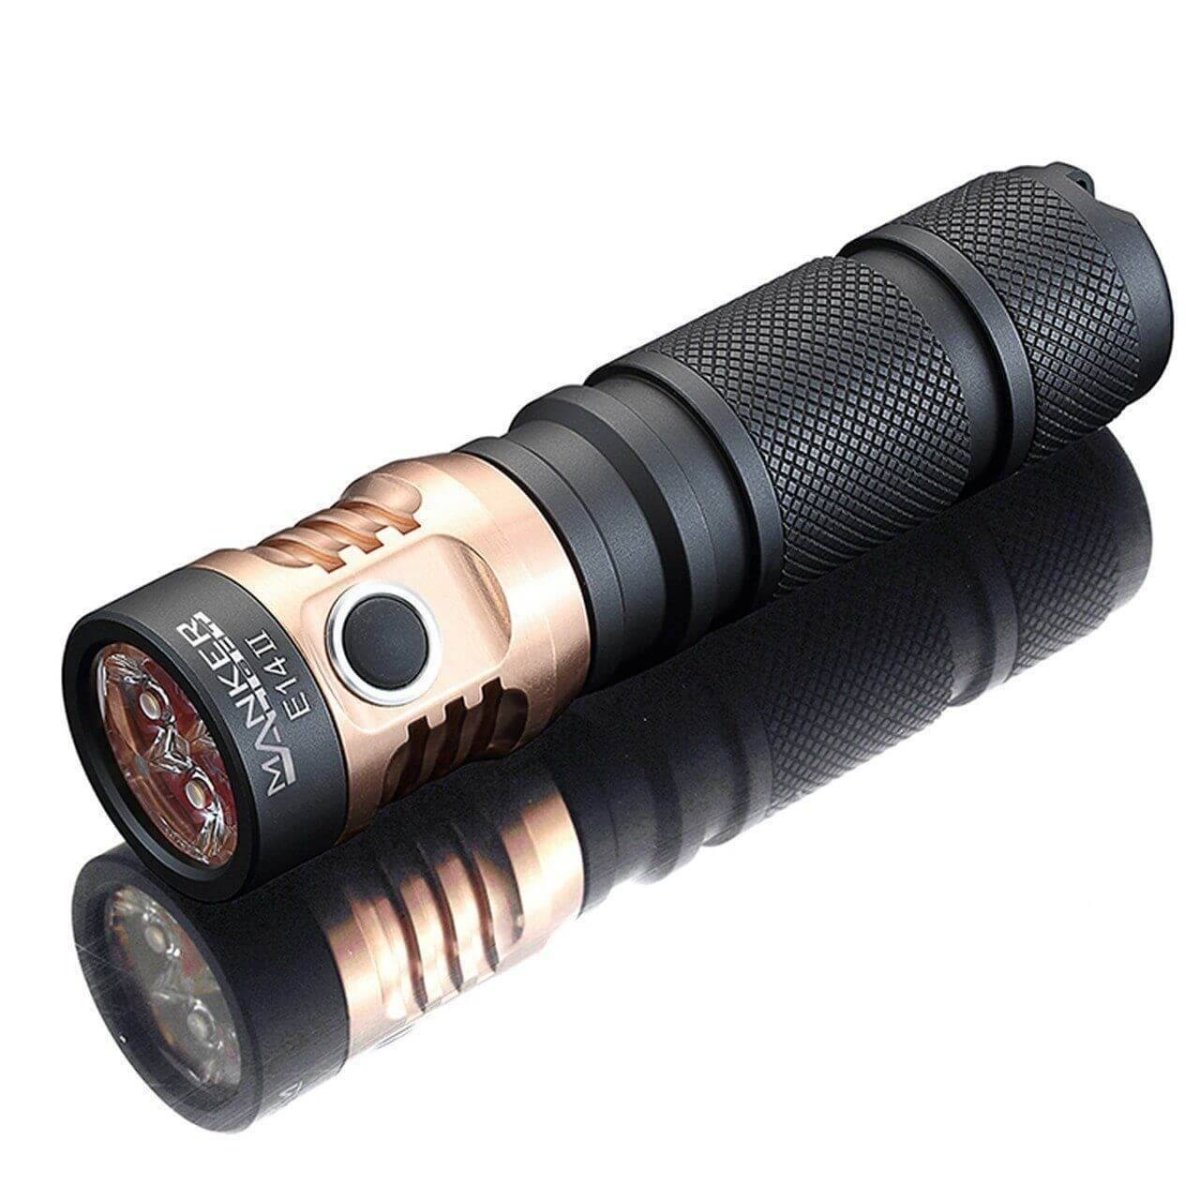 Gear Review: Manker E14 II Flashlight - NORTH RIVER OUTDOORS